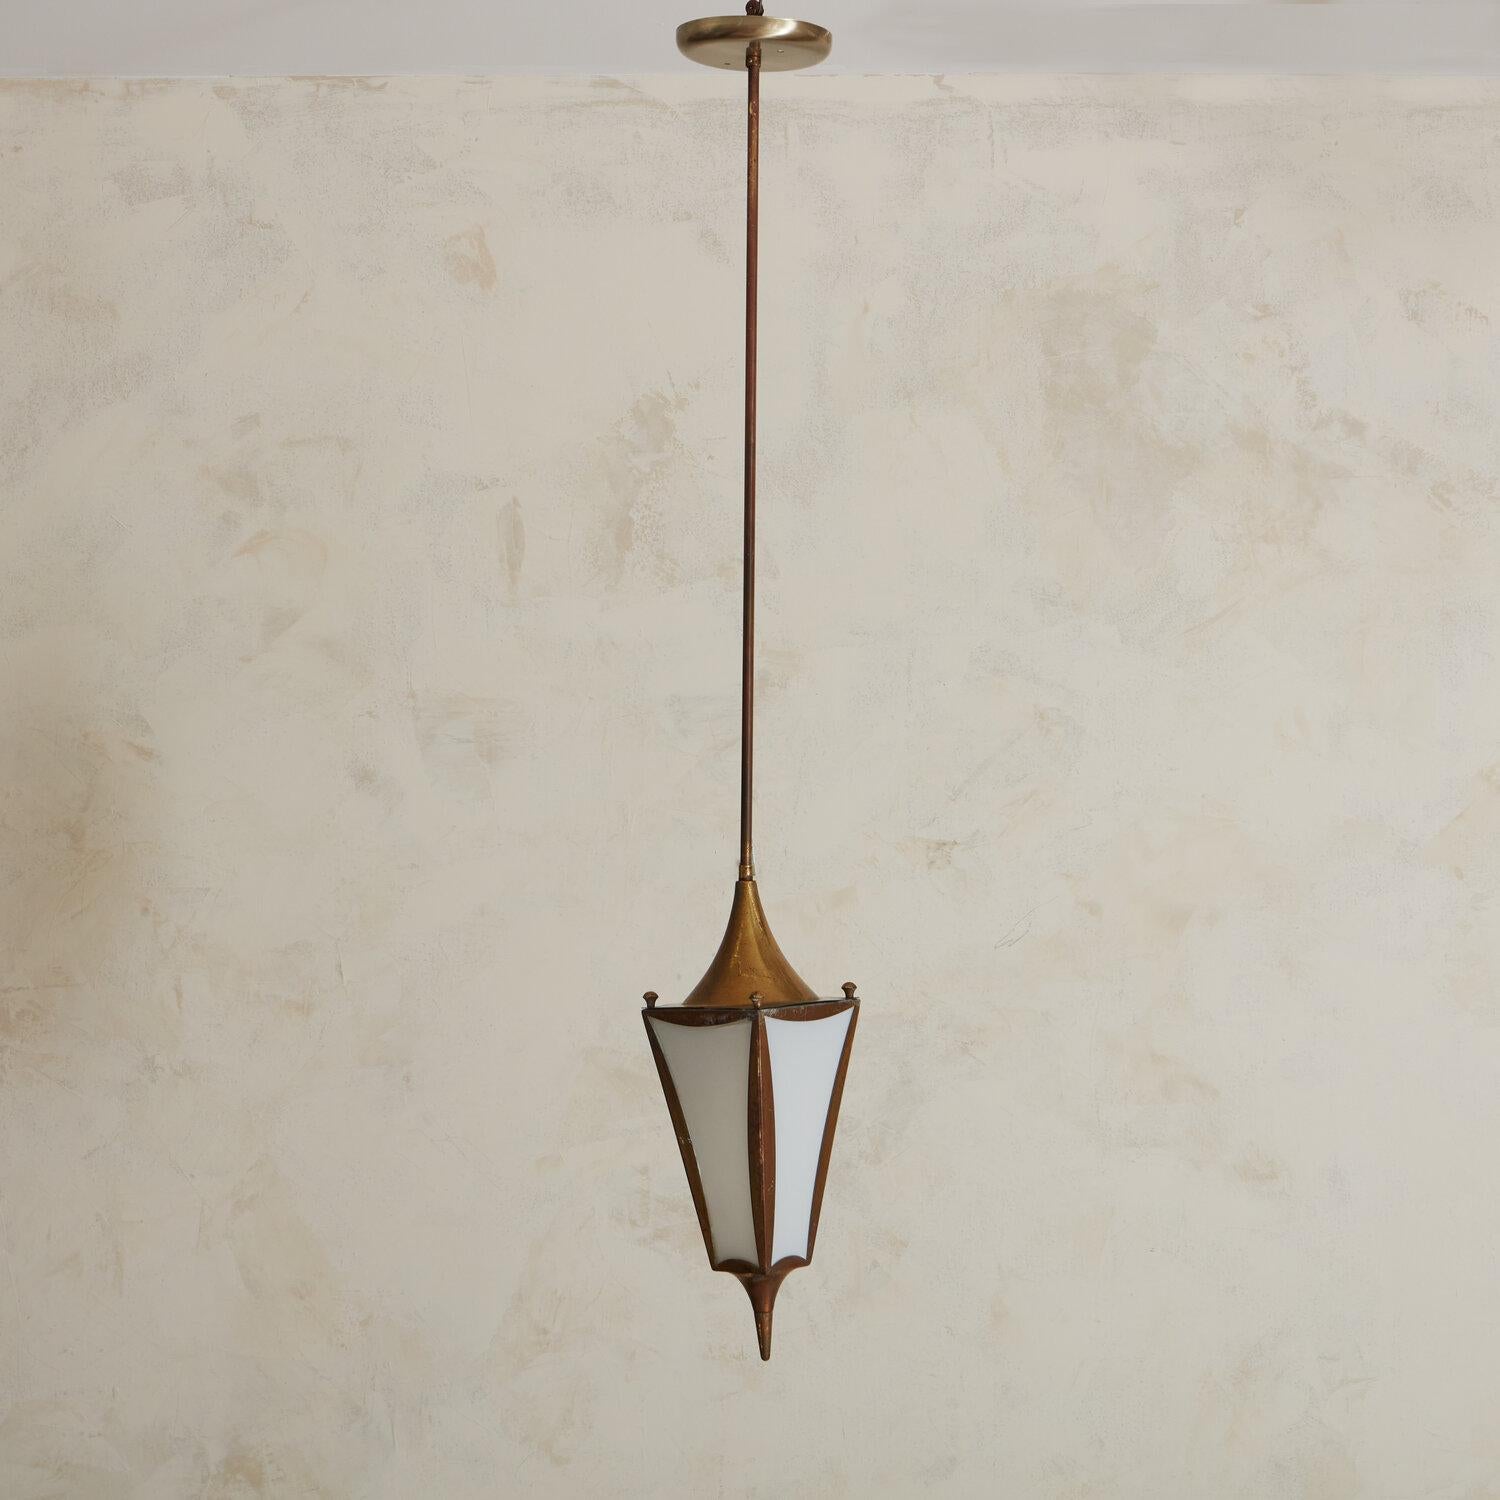 A 1960s Brass Pendant from Northern Italy. Featuring a patinated copper frame with a slightly more modern frame as compared to more commonly found lanterns.

dimensions: 17” H x 5.25” W x 5.25” D; Total height to canopy: 44”; 5.25” diameter